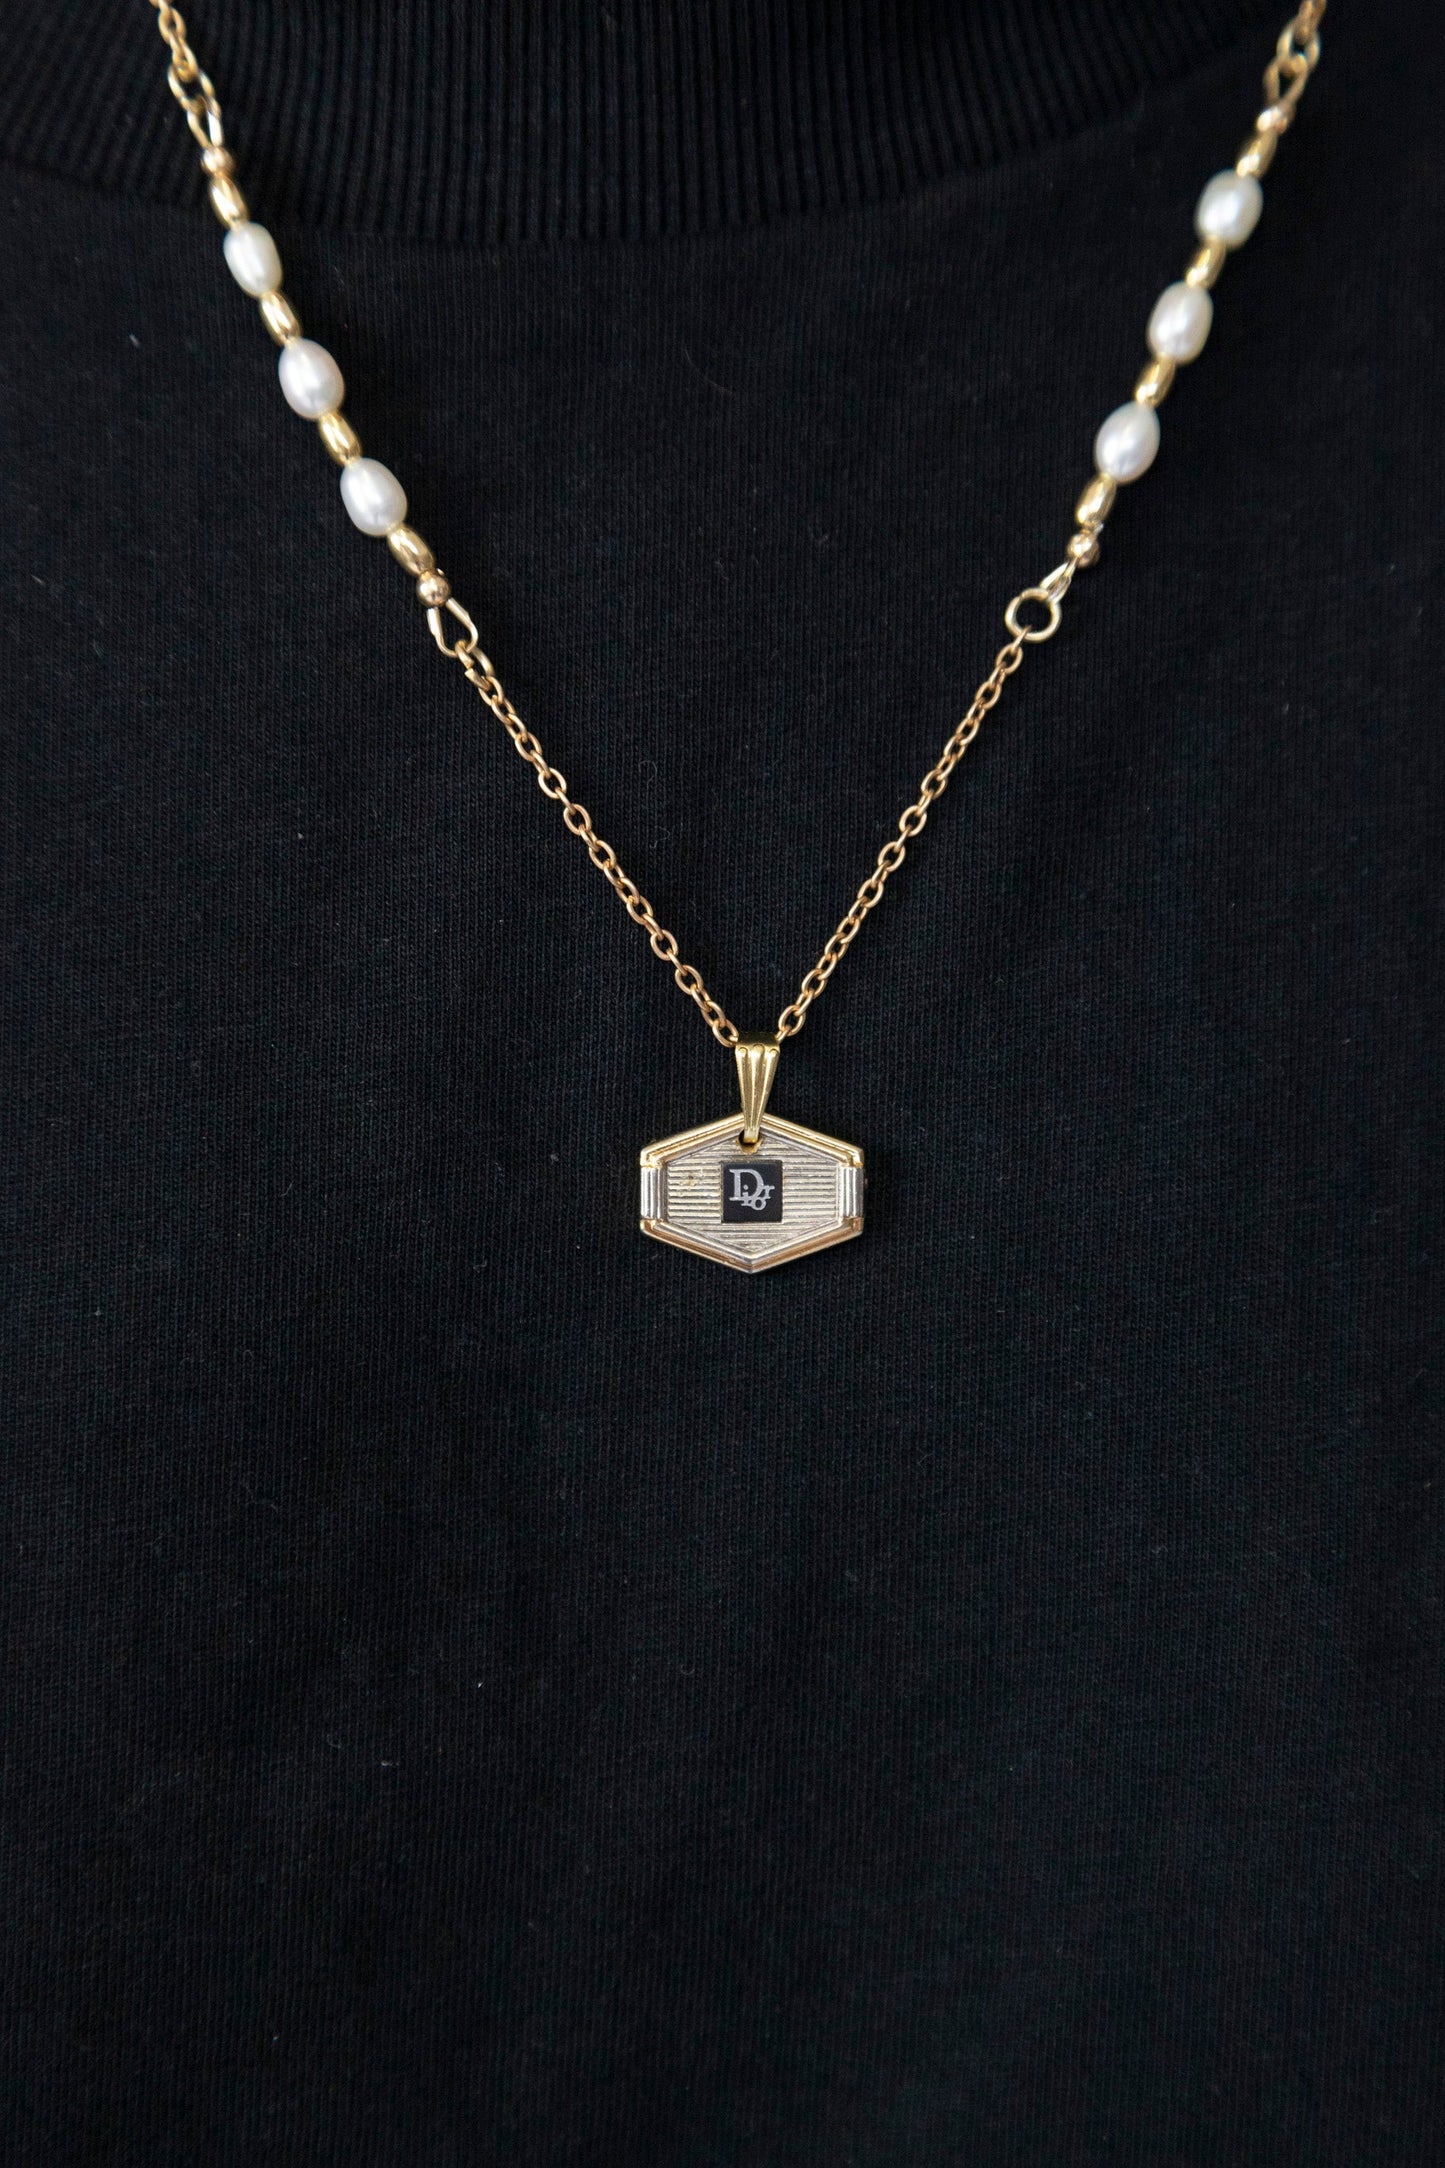 VT Rework: Christian Dior Hexagonal Logo Gold Pearled Link Chain Necklace